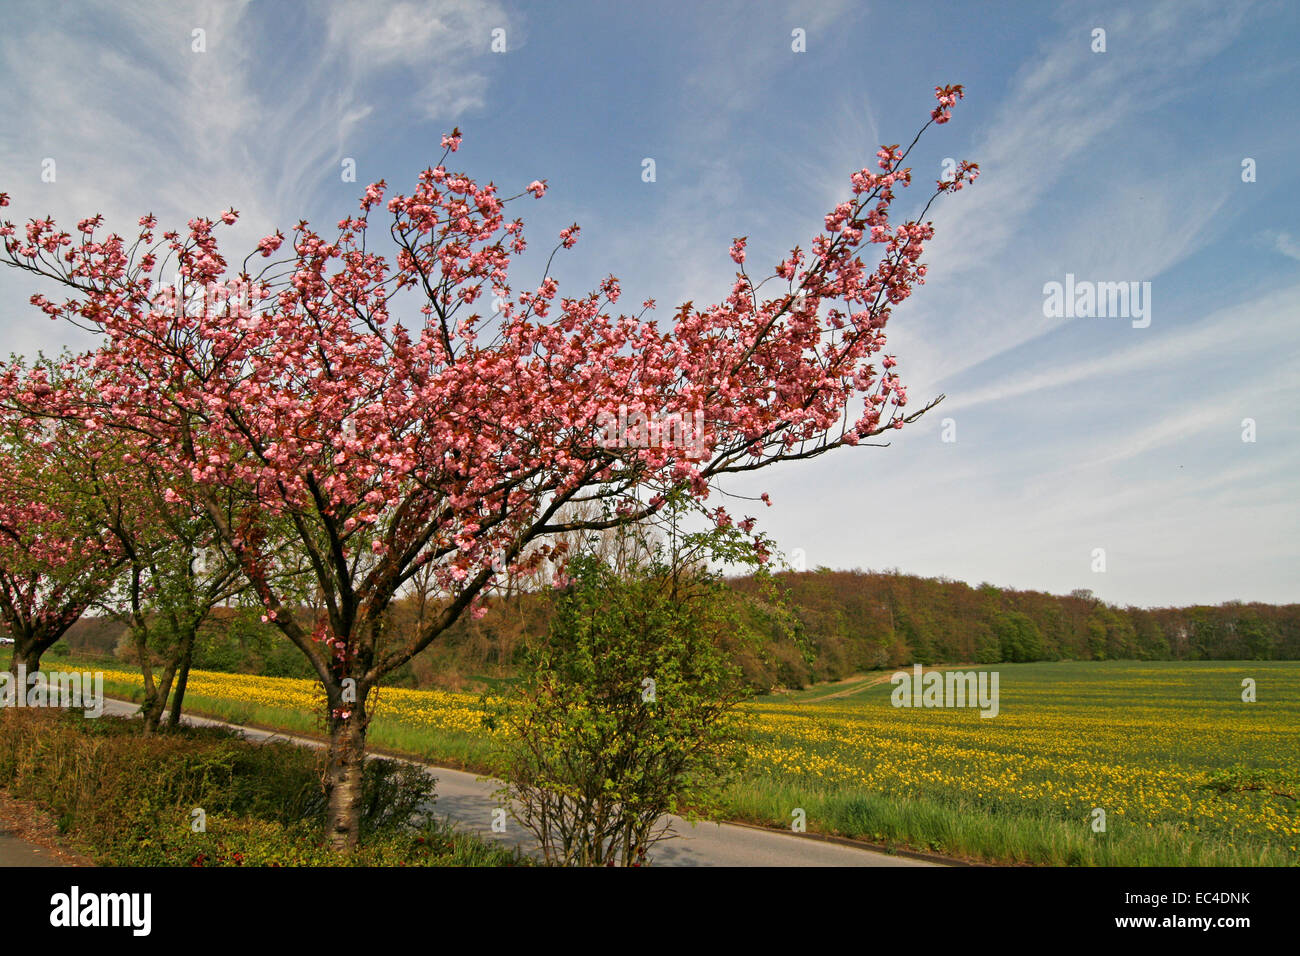 Cherry tree in April in Bad Rothenfelde, Osnabruecker country, Lower Saxony, Germany Stock Photo